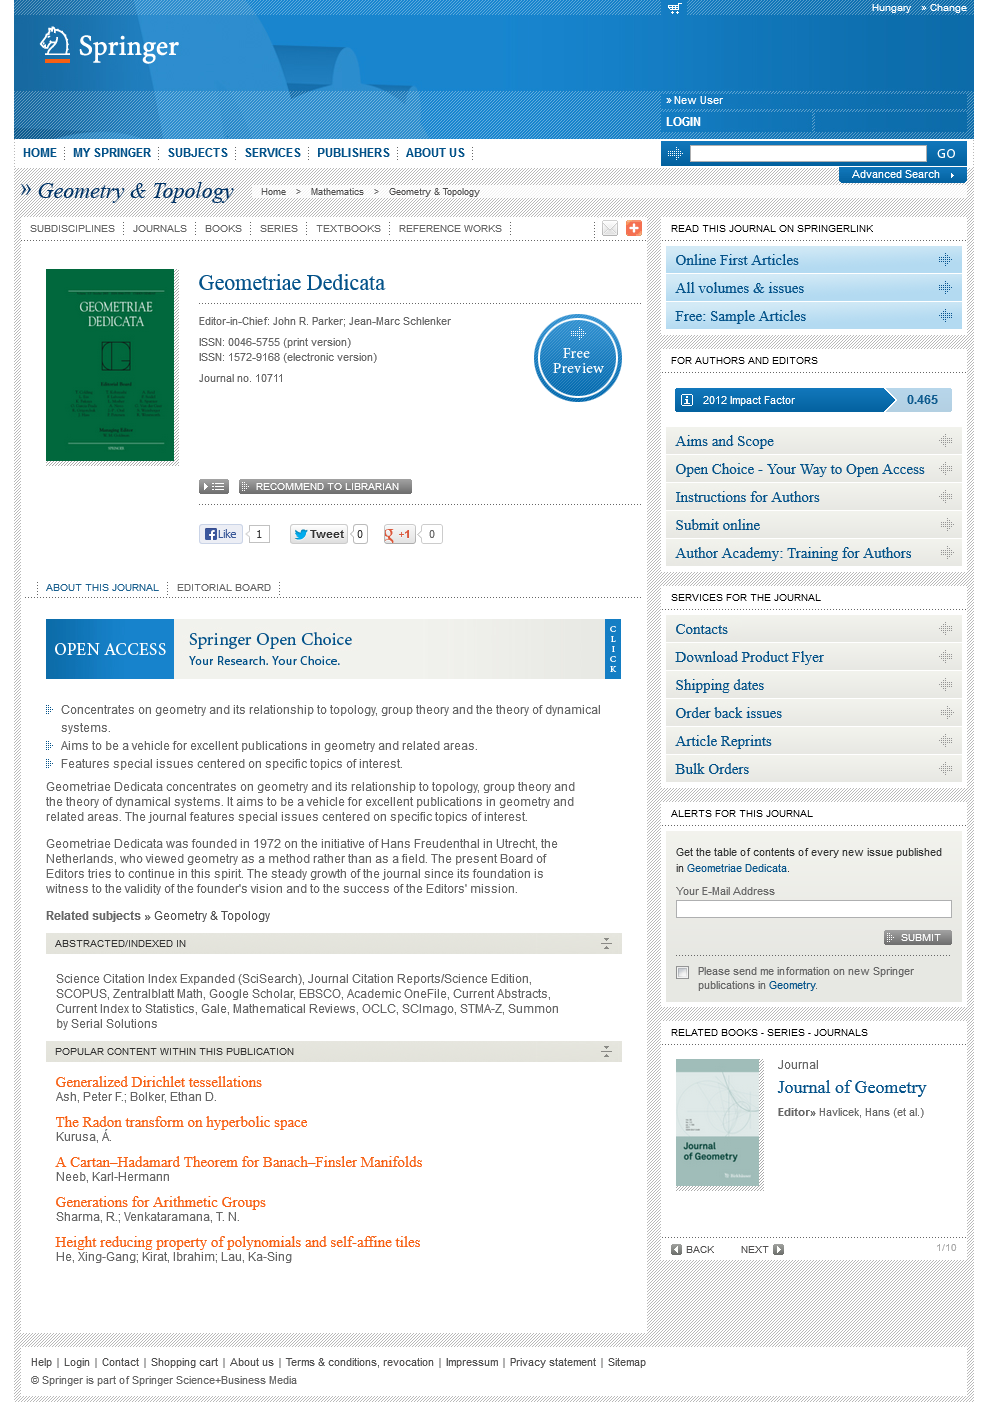 An article from Kurusa is highlighted on the front page of Geometriae Dedicata